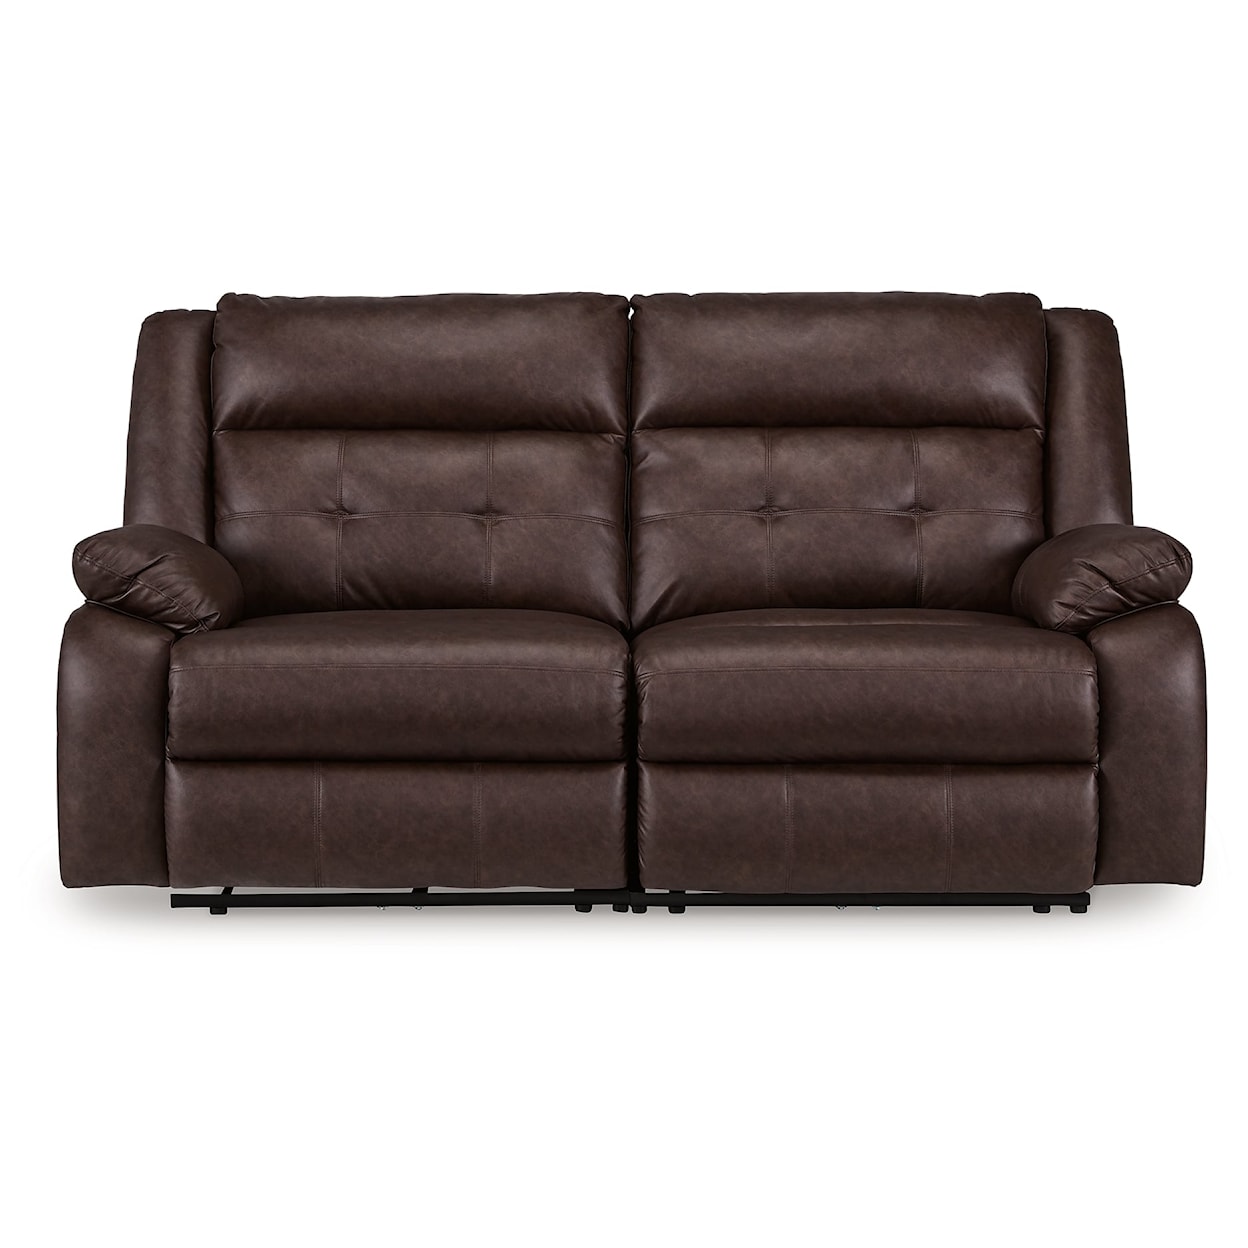 Signature Punch Up 2-Piece Power Reclining Loveseat